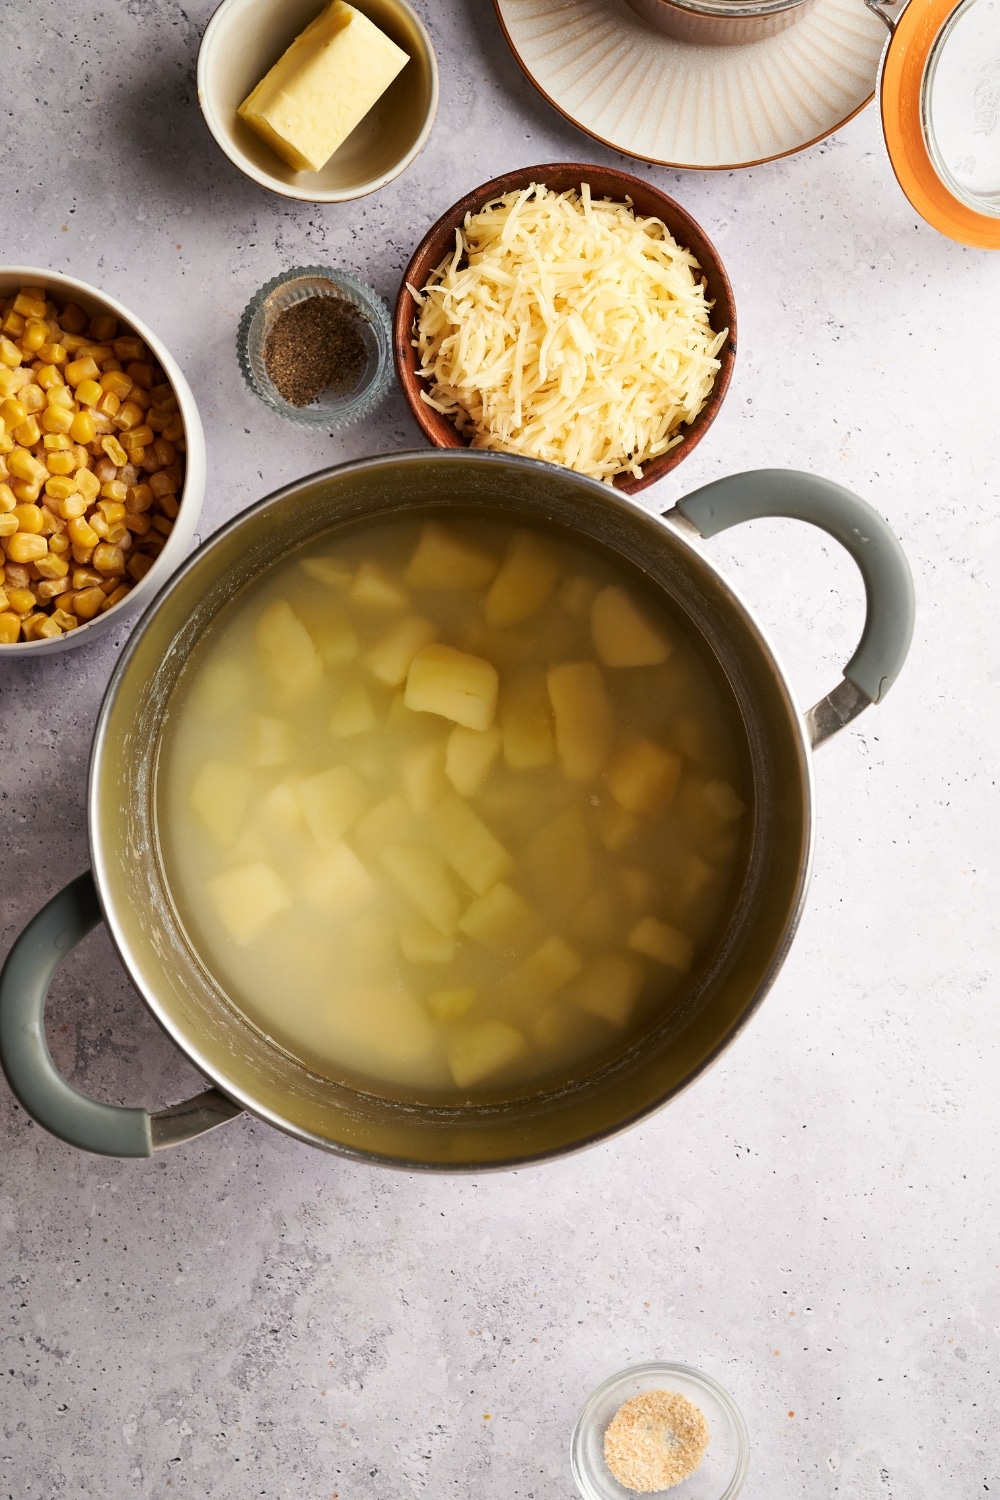 A pot filled with diced potatoes in water. The pot is surrounded by bowls of spices, butter, shredded cheese, and corn.